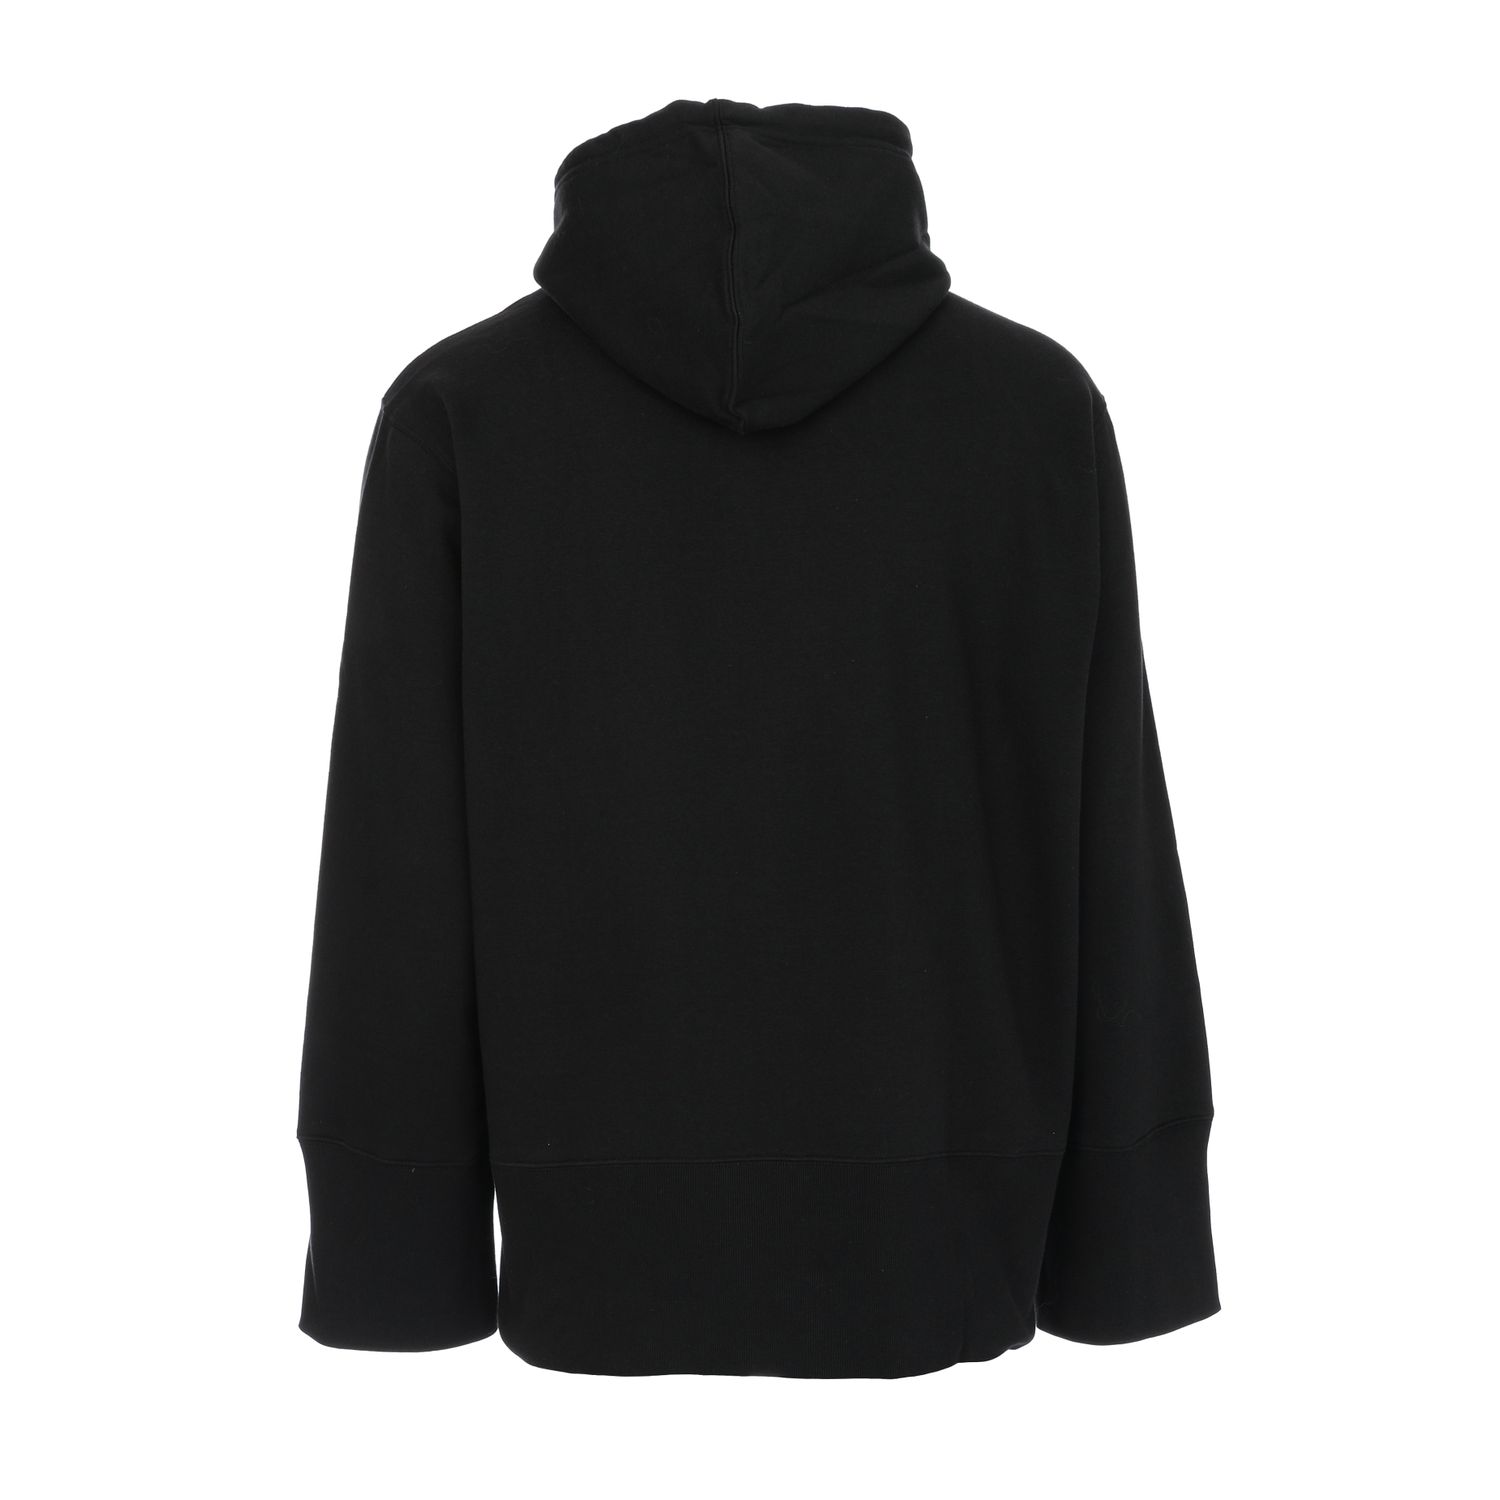 Black adidas Mens Comfy and Chill Fleece Hoody - Get The Label